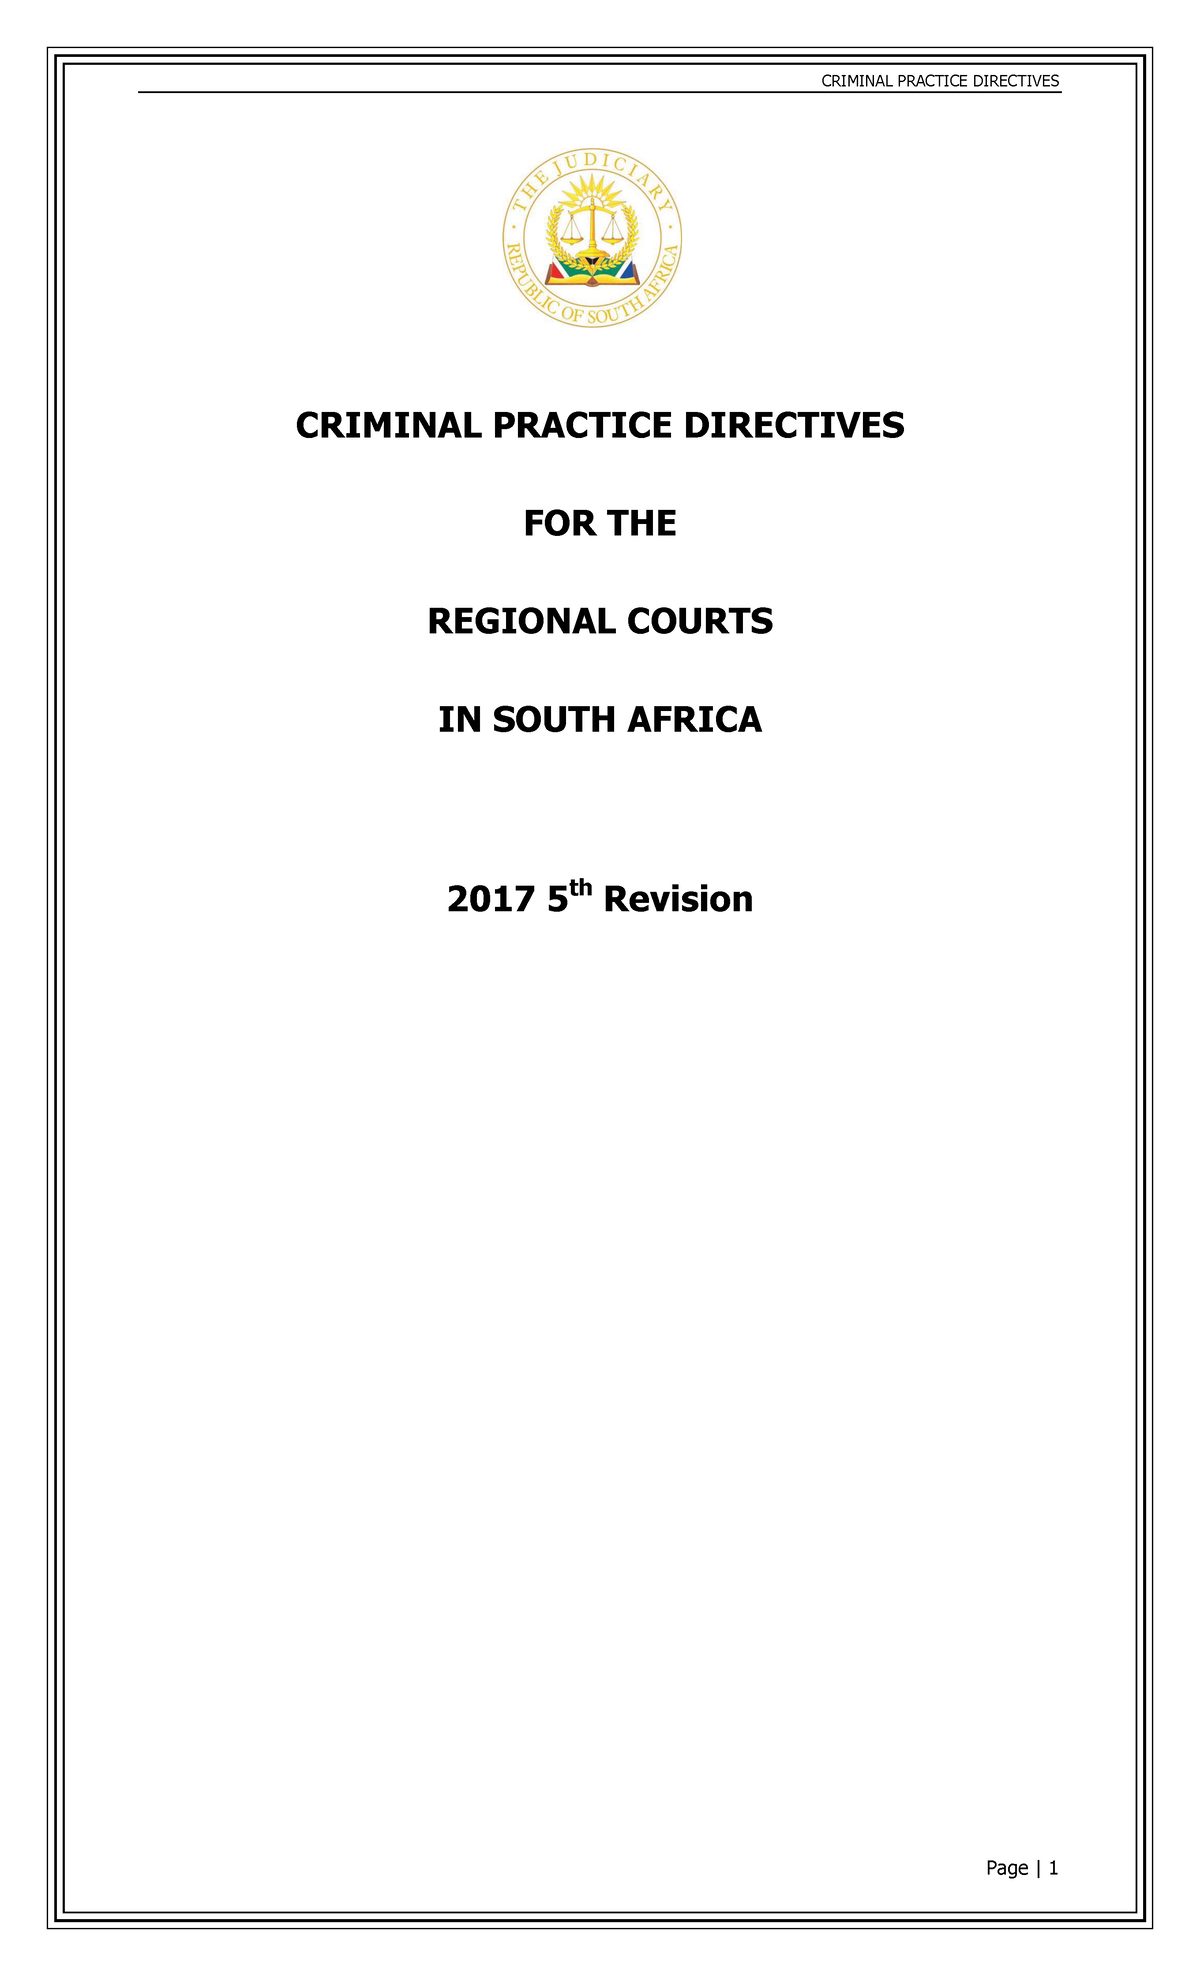 Criminal Court Practice Directives 2017 5th revision PPLM 821 NWU